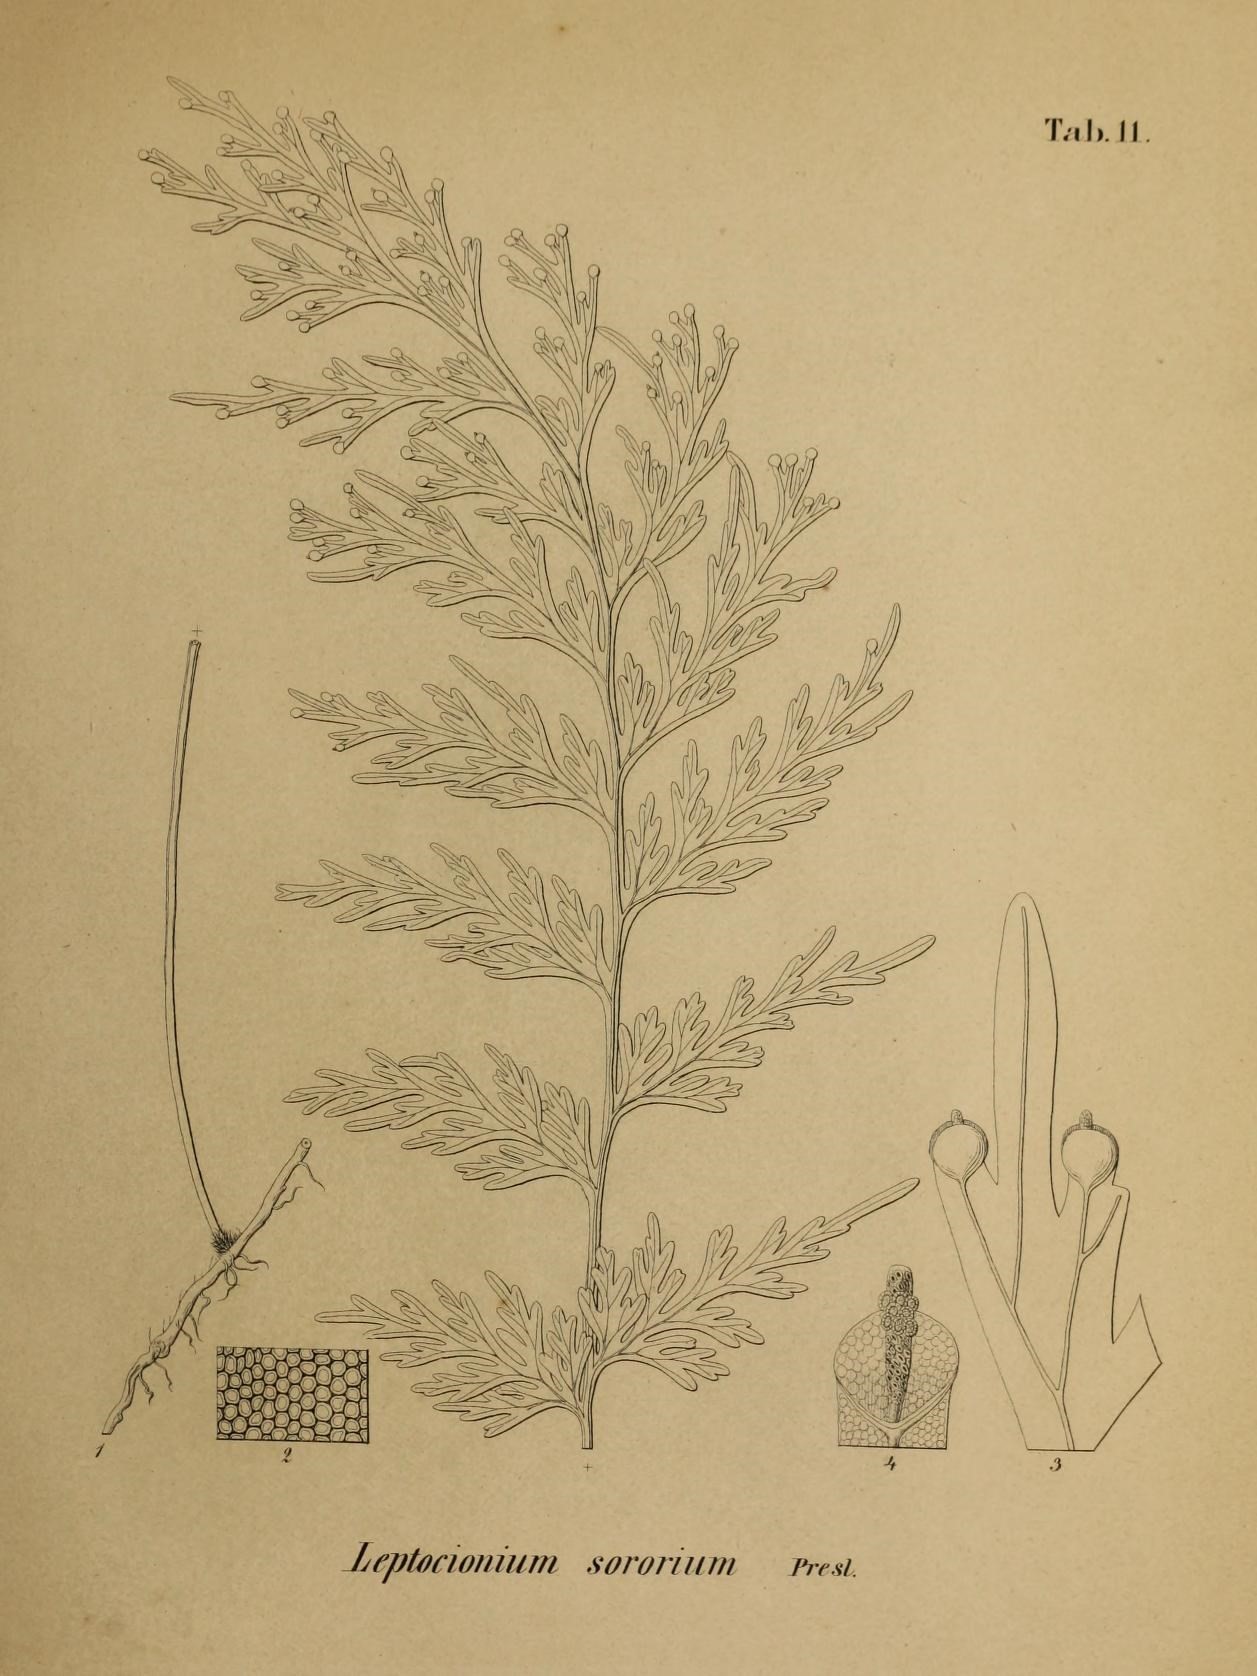 a drawing of a plant with many nches